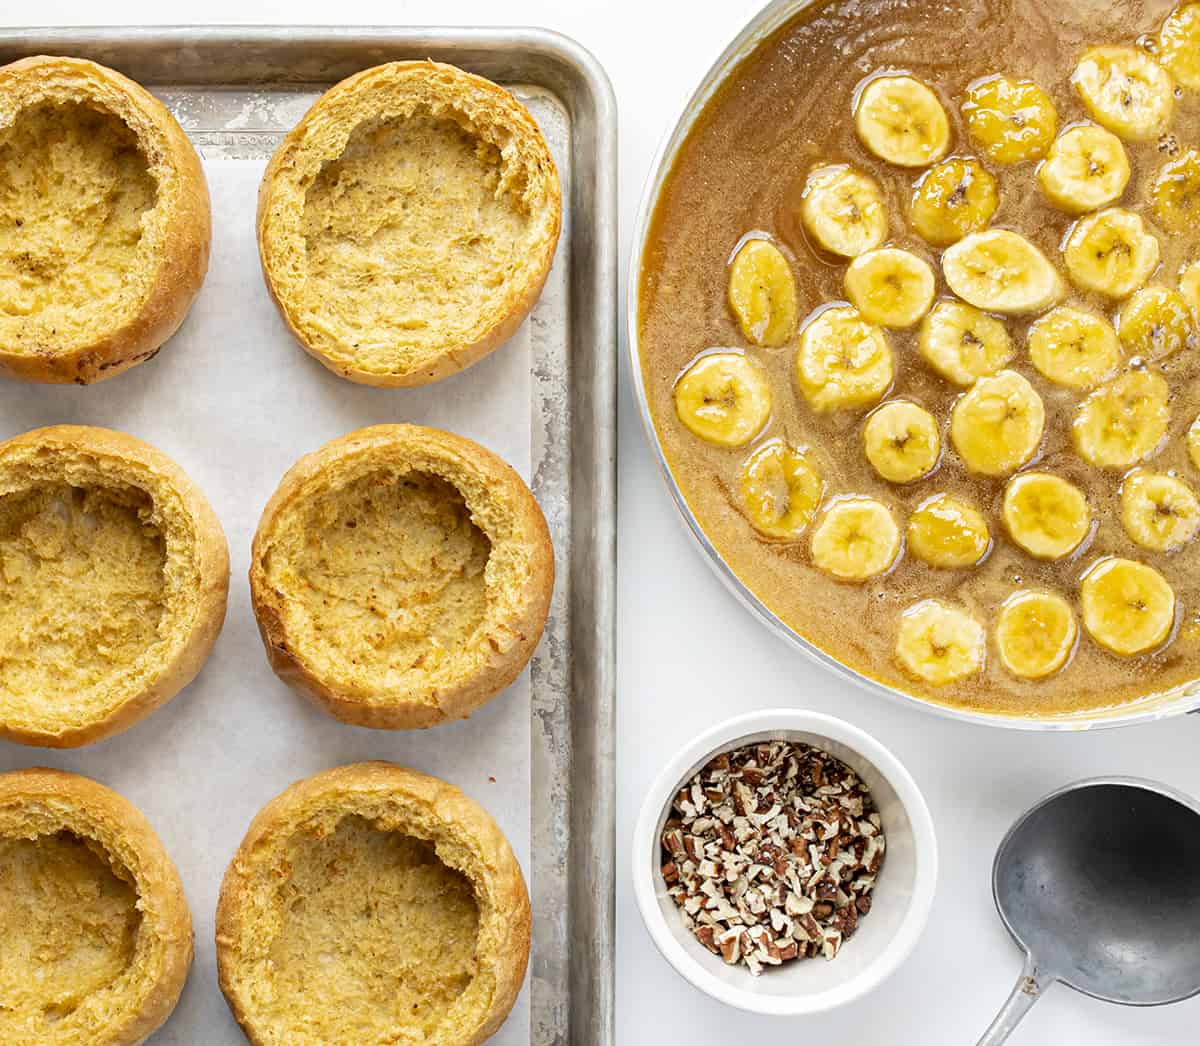 Ingredients needed for making Bananas Foster French Toast Bowl. Breakfast, Breakfast Bowl, French Toast, French Toast Bread Bowl, Bananas Foster French Toast Bread Bowl, Air Fryer Breakfast, Breakfast Recipes, Brunch Recipes, Easy Bananas Foster, French Toast Bowls, i am baker, iambaker.